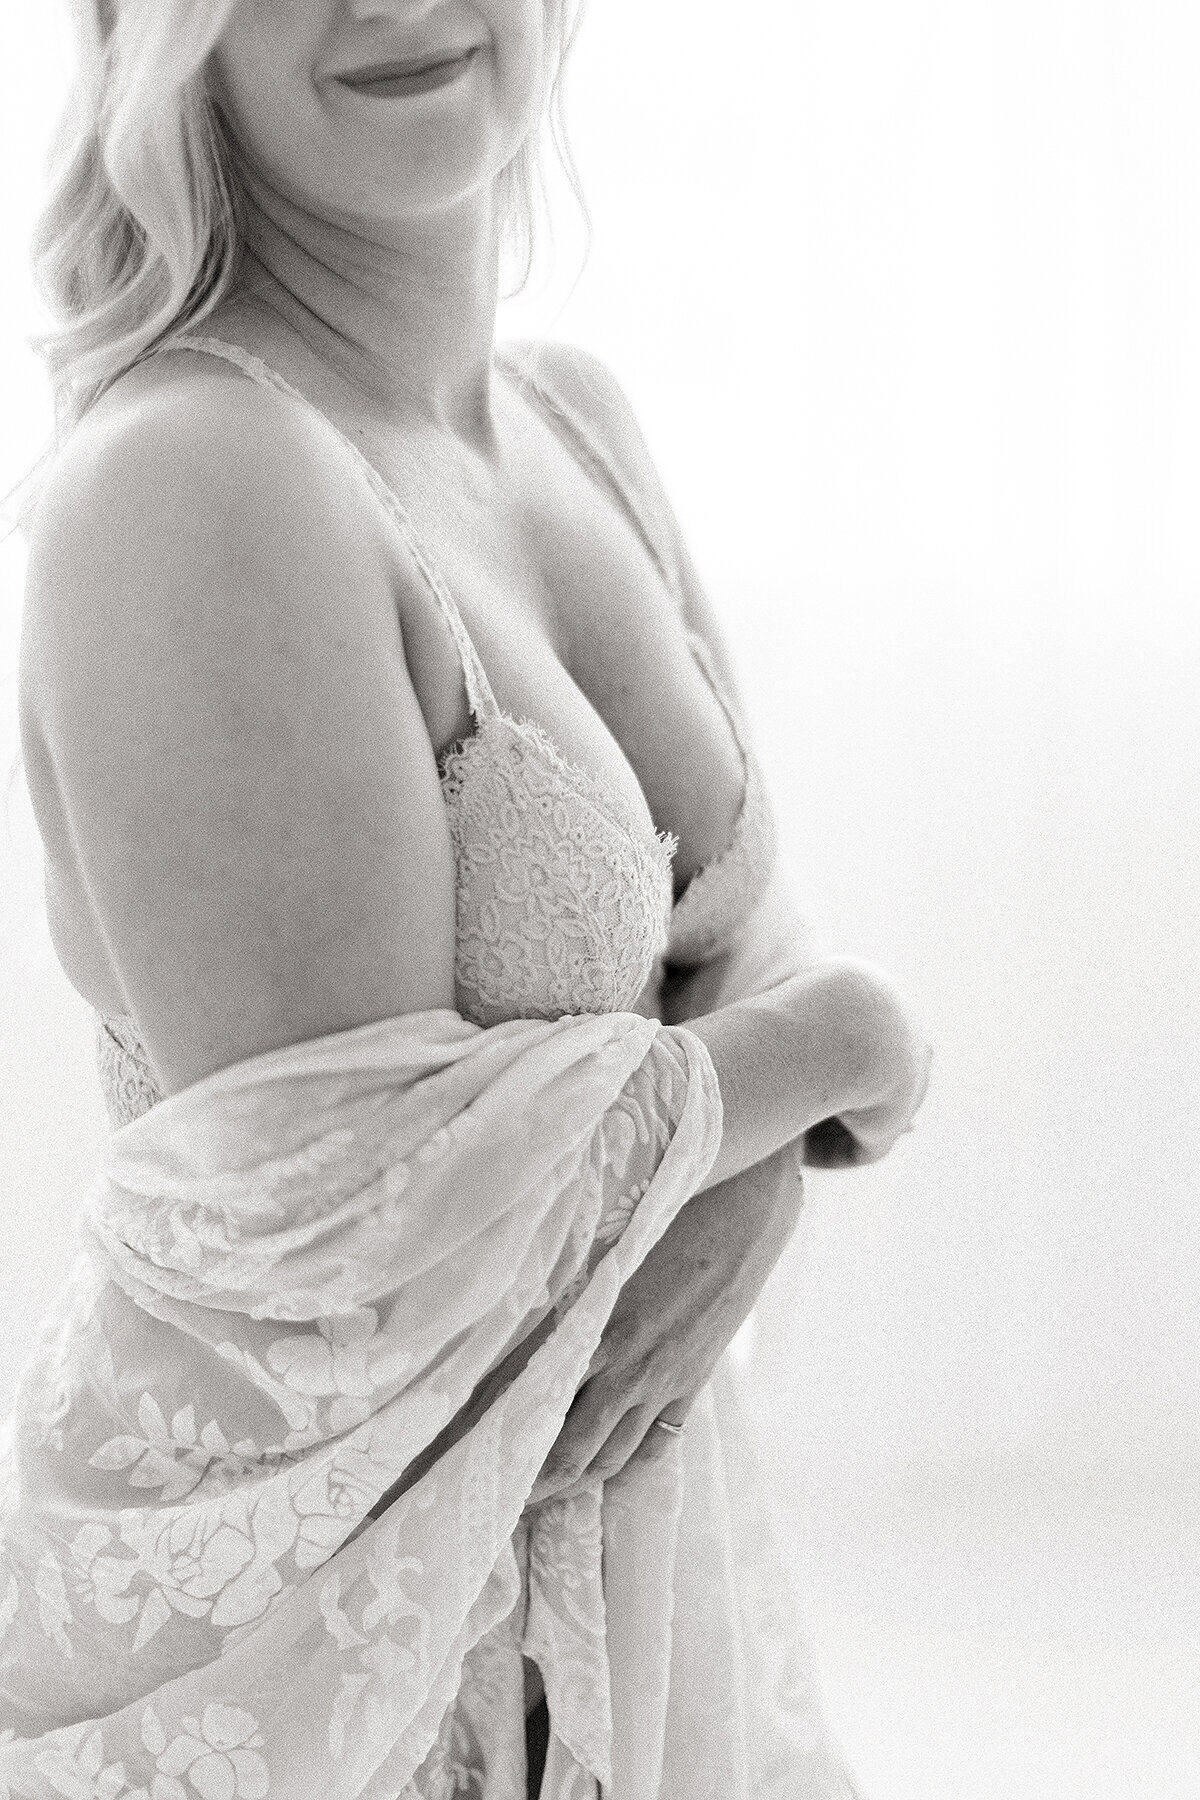 Close up black and white in studio boudoir photo of a woman wearing a lace bra with a robe draped and hanging off her shoulders.